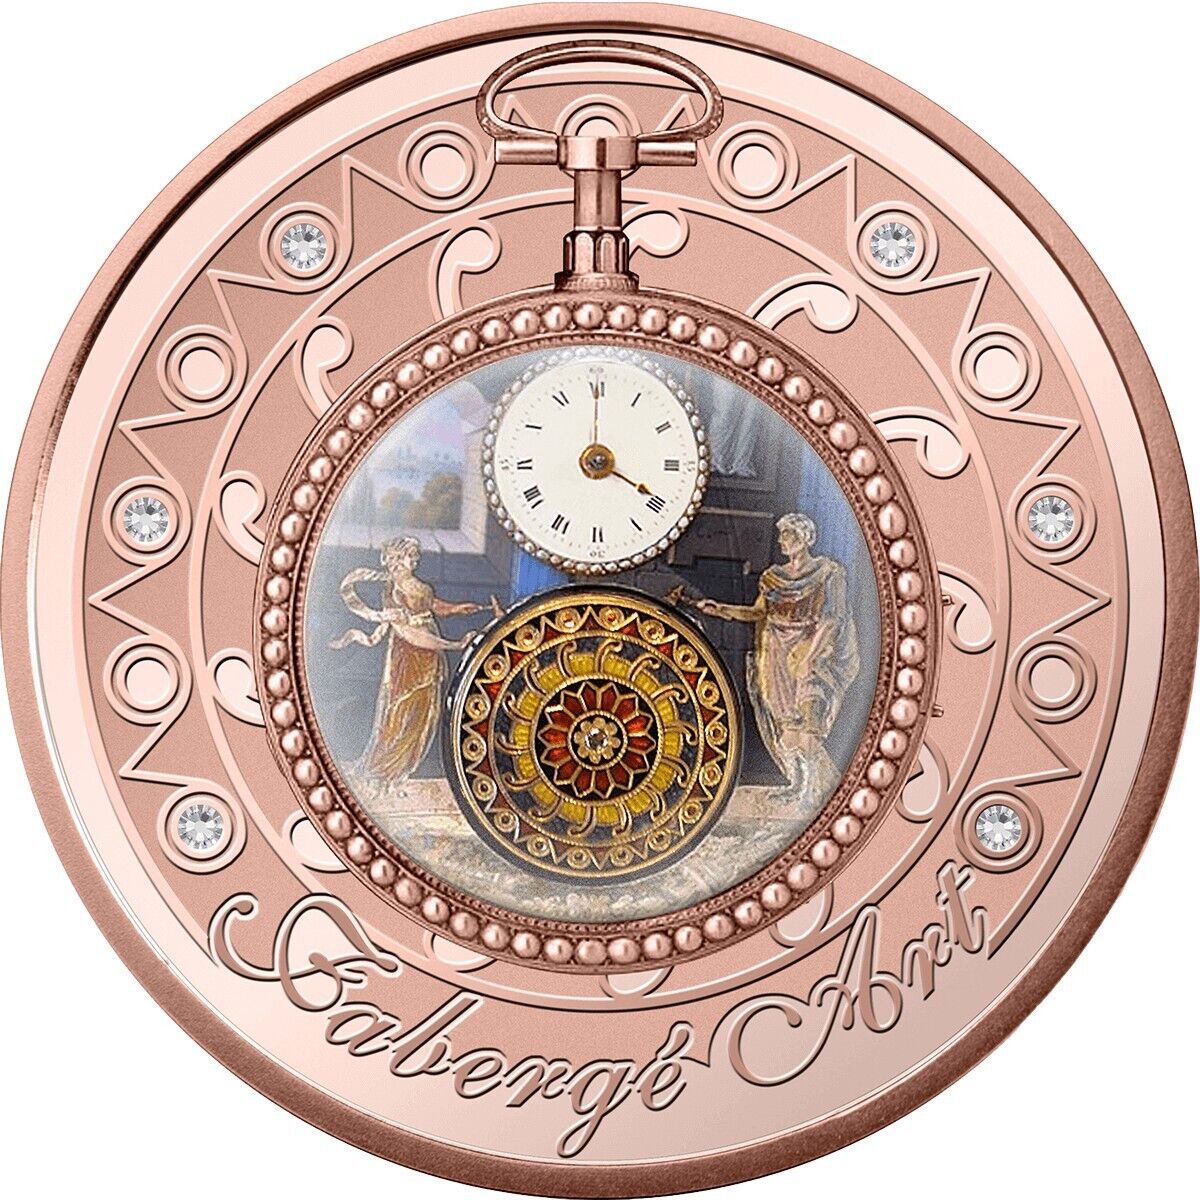 1 Oz Silver Coin 2022 $1 Niue Proof Pocket Watch Faberge Art Crystal Inserts